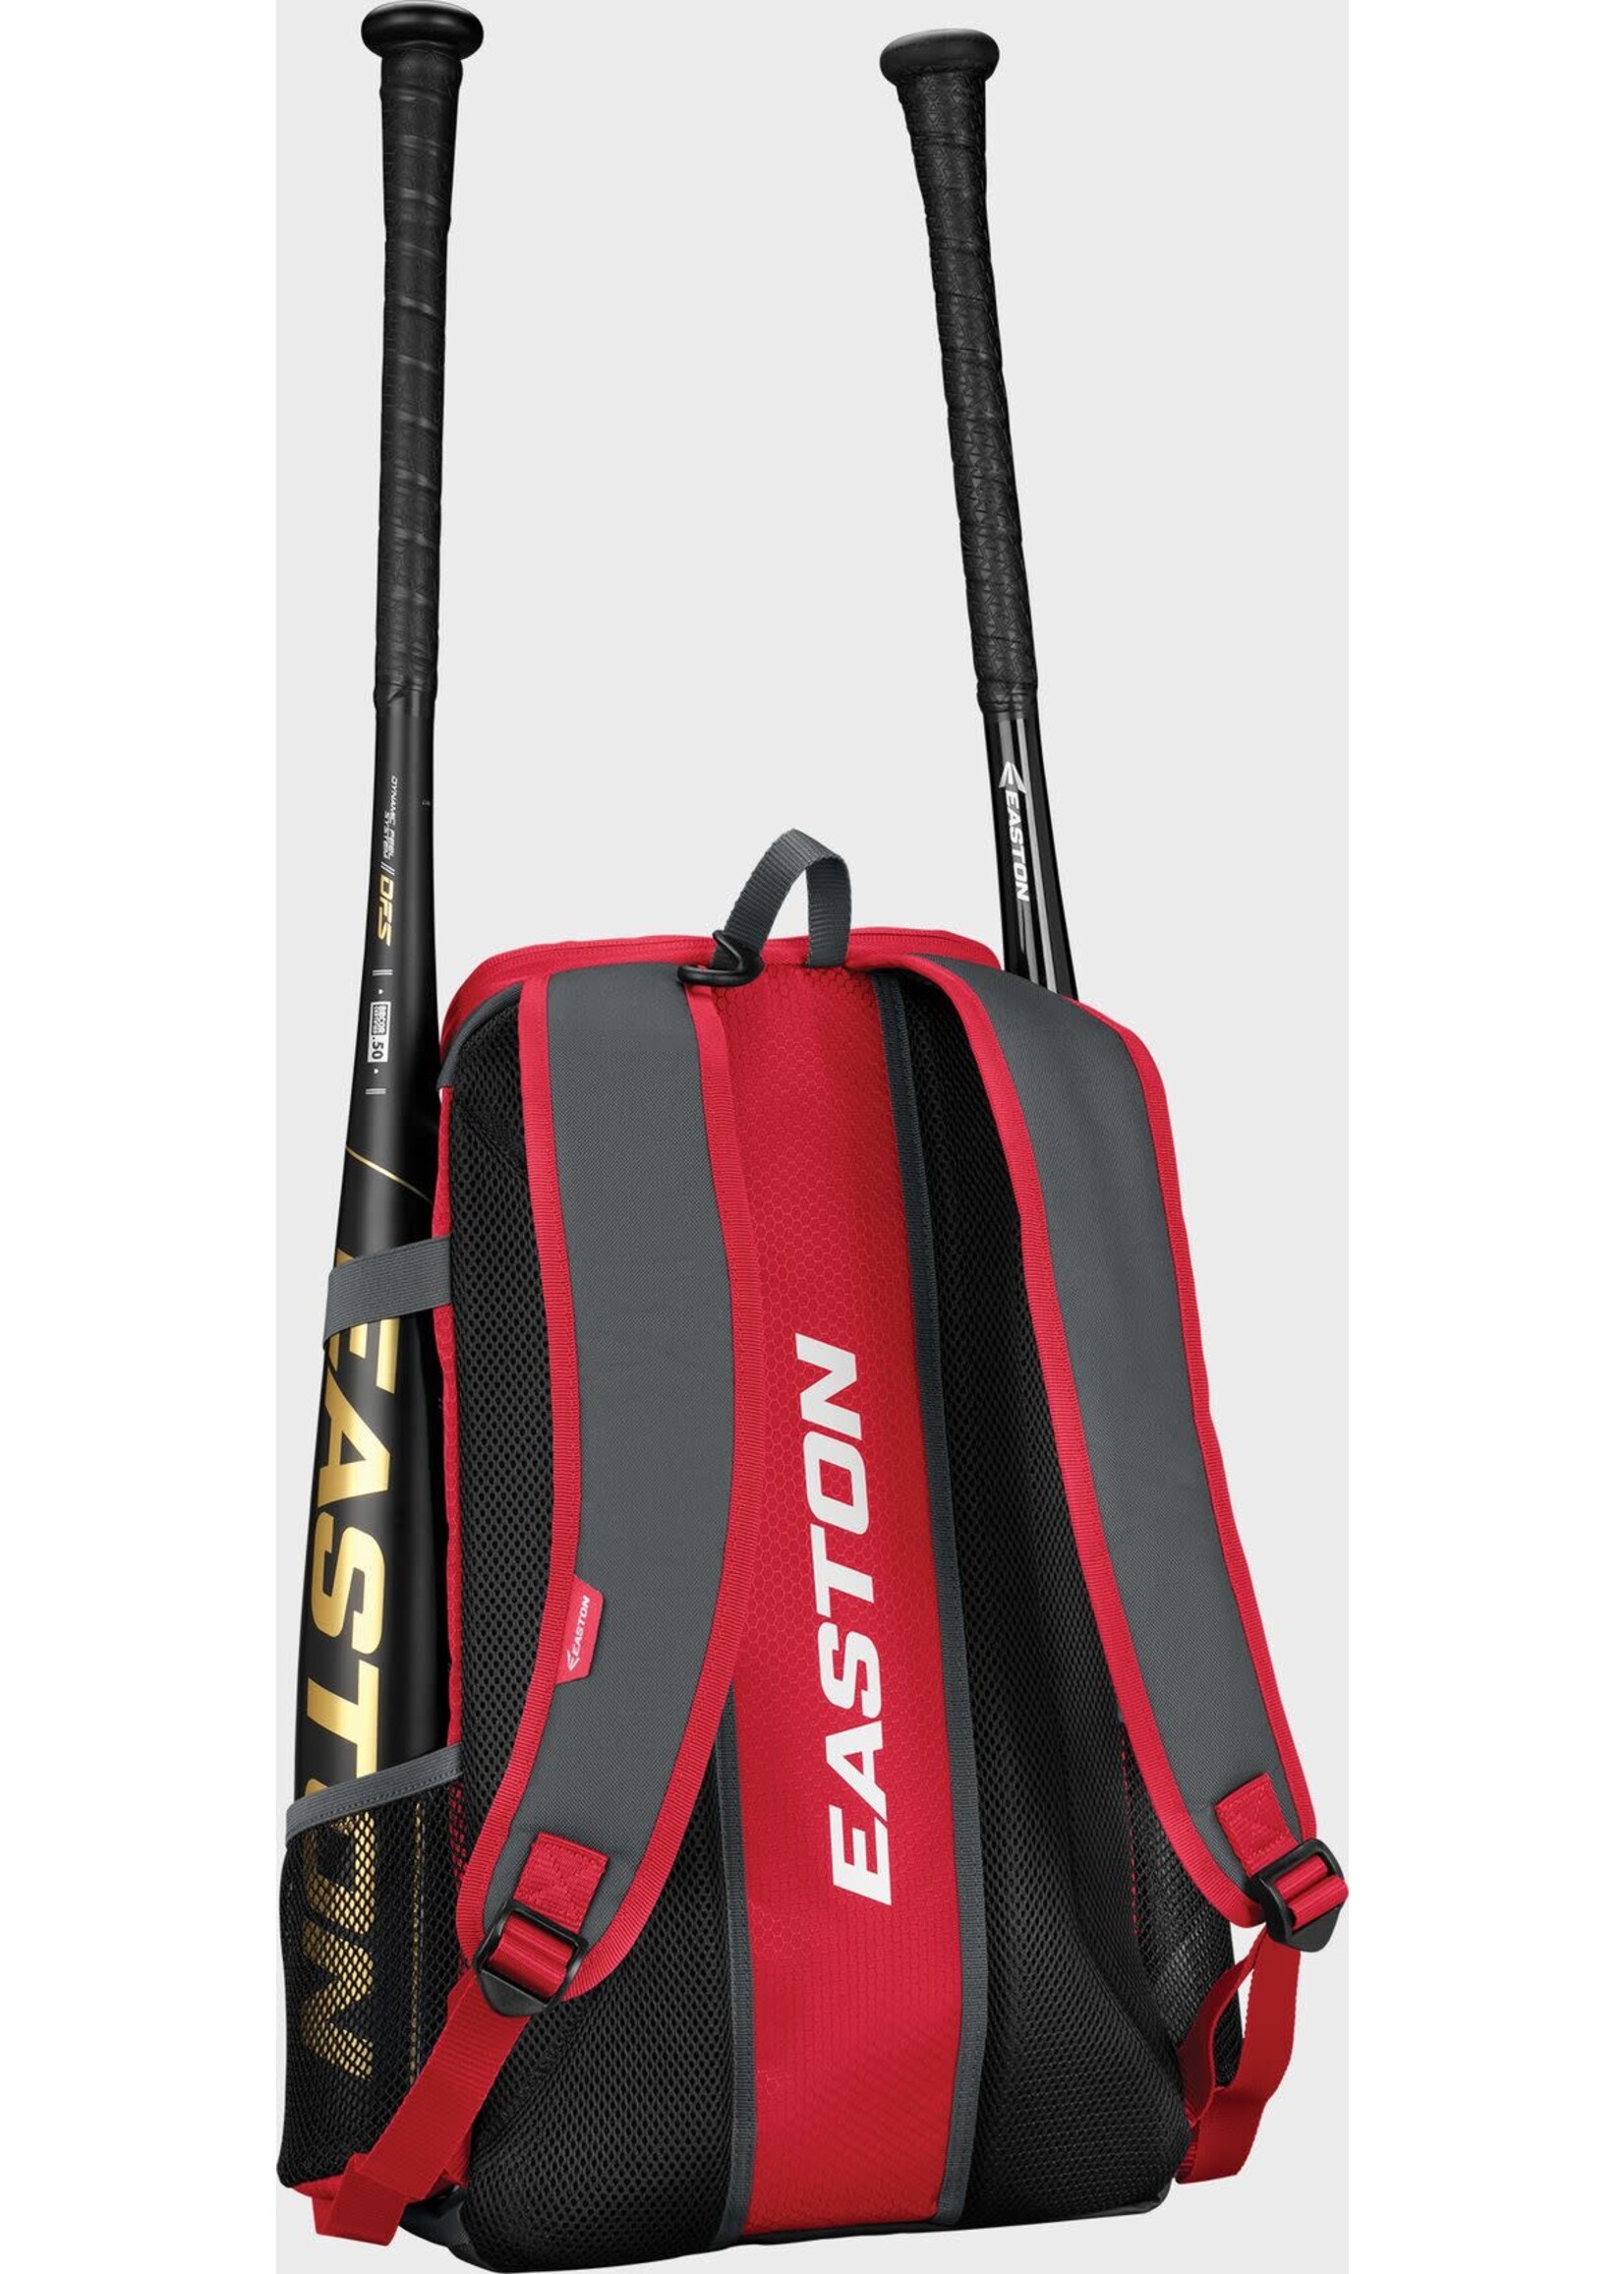 EASTON GAME READY BACKPACK